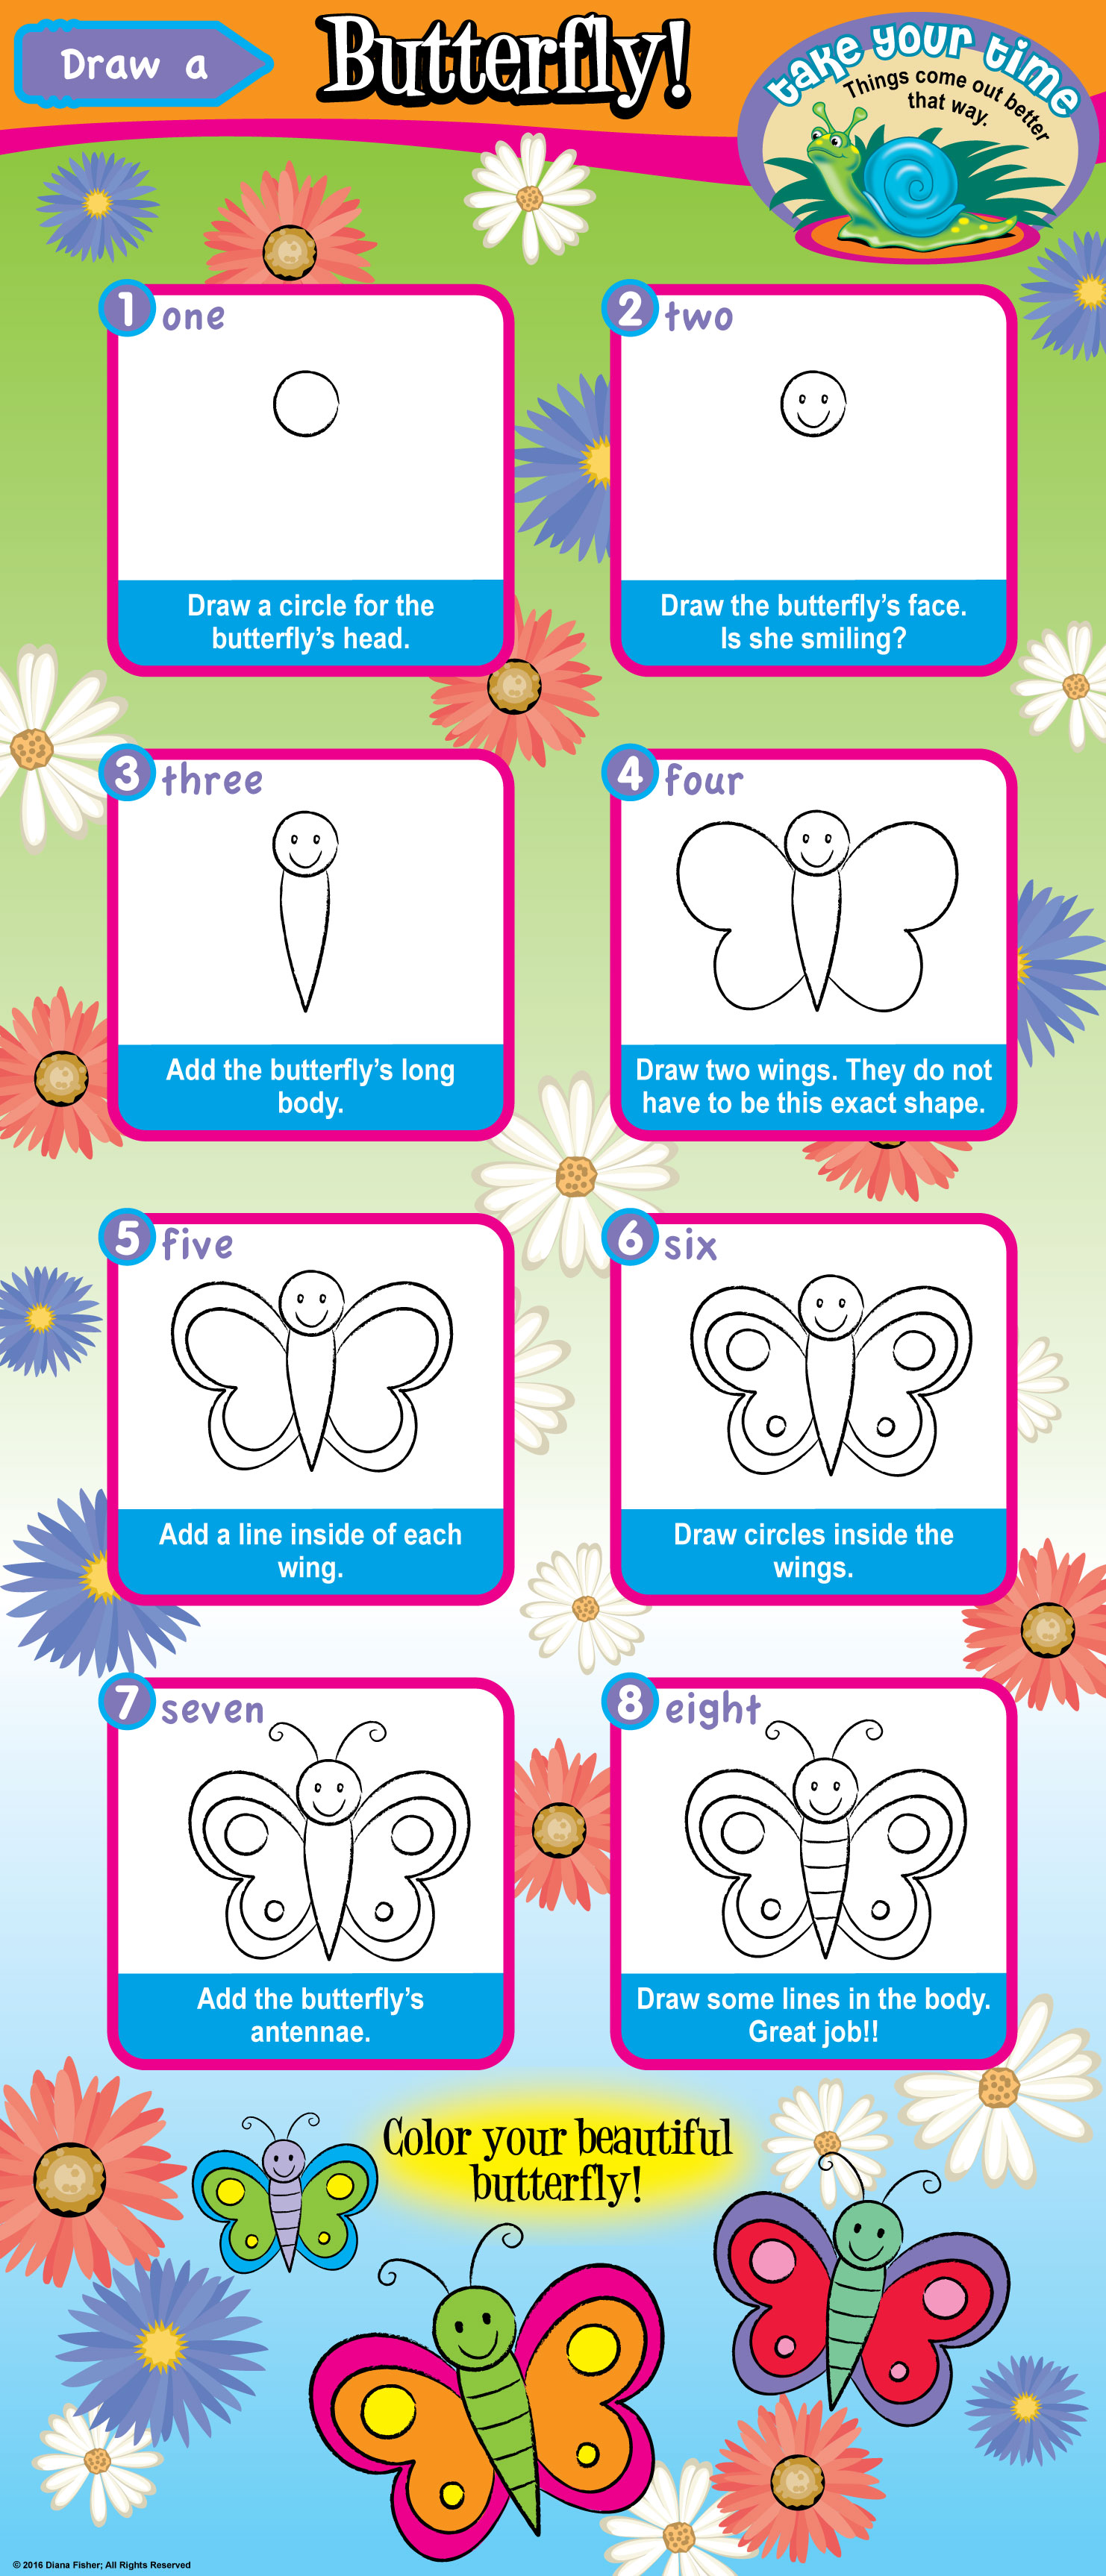 step by step instructions to draw a butterfly for children